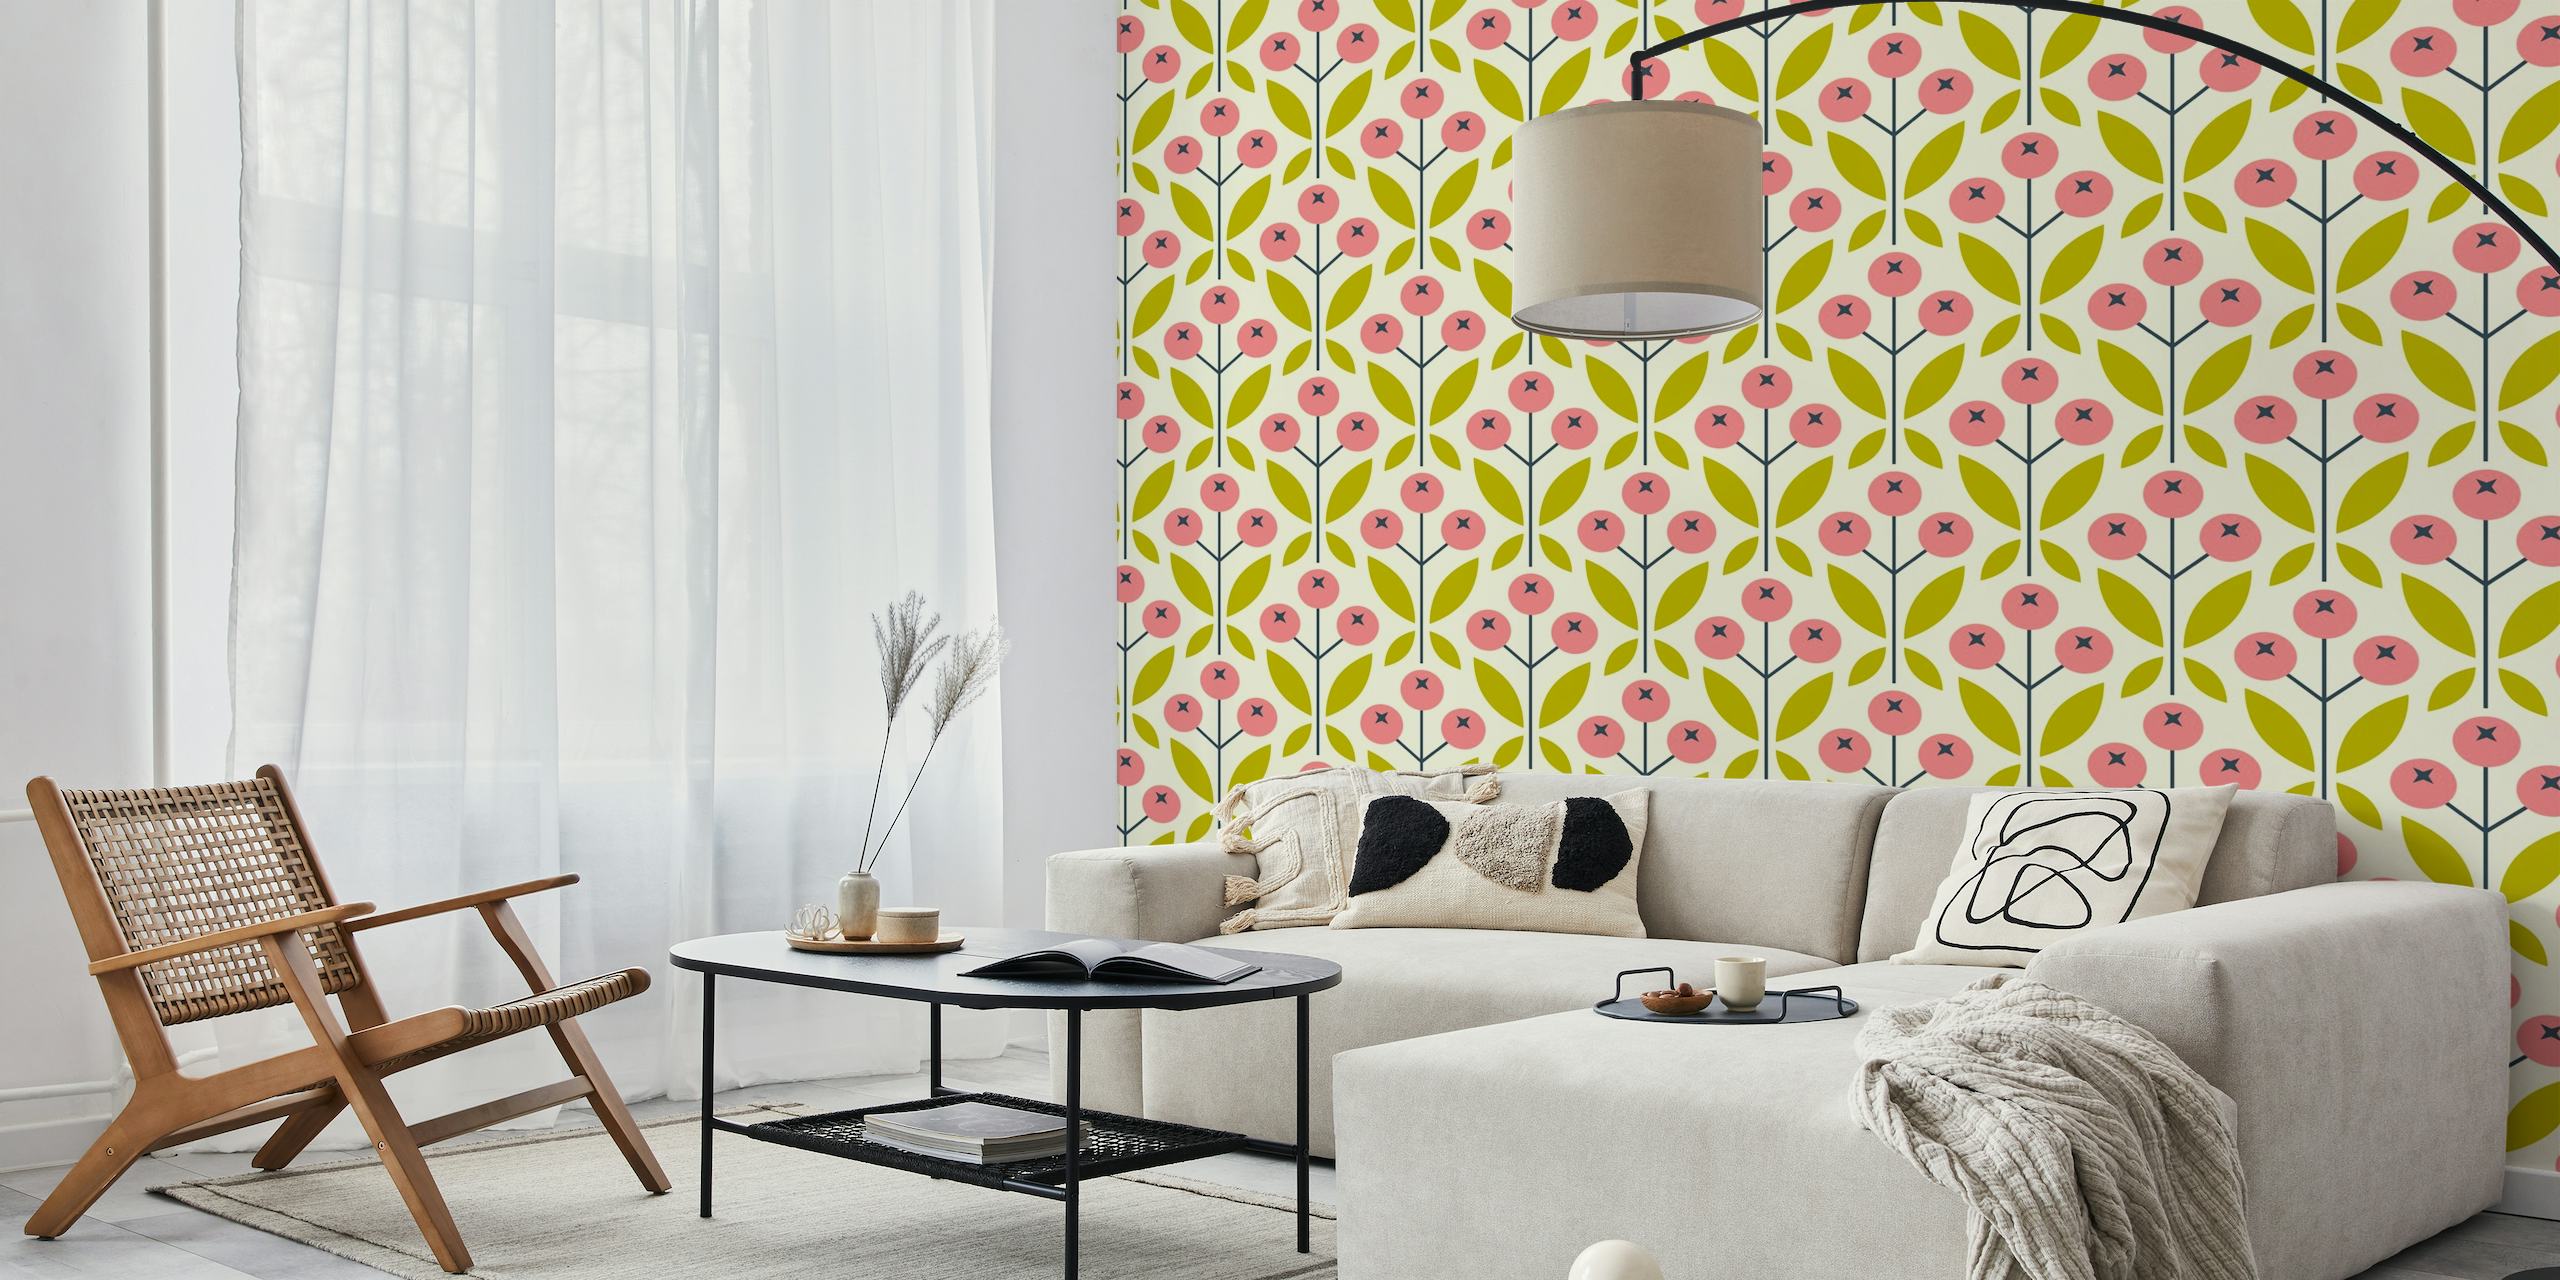 Geometric pink berries and green leaves pattern on beige background wall mural